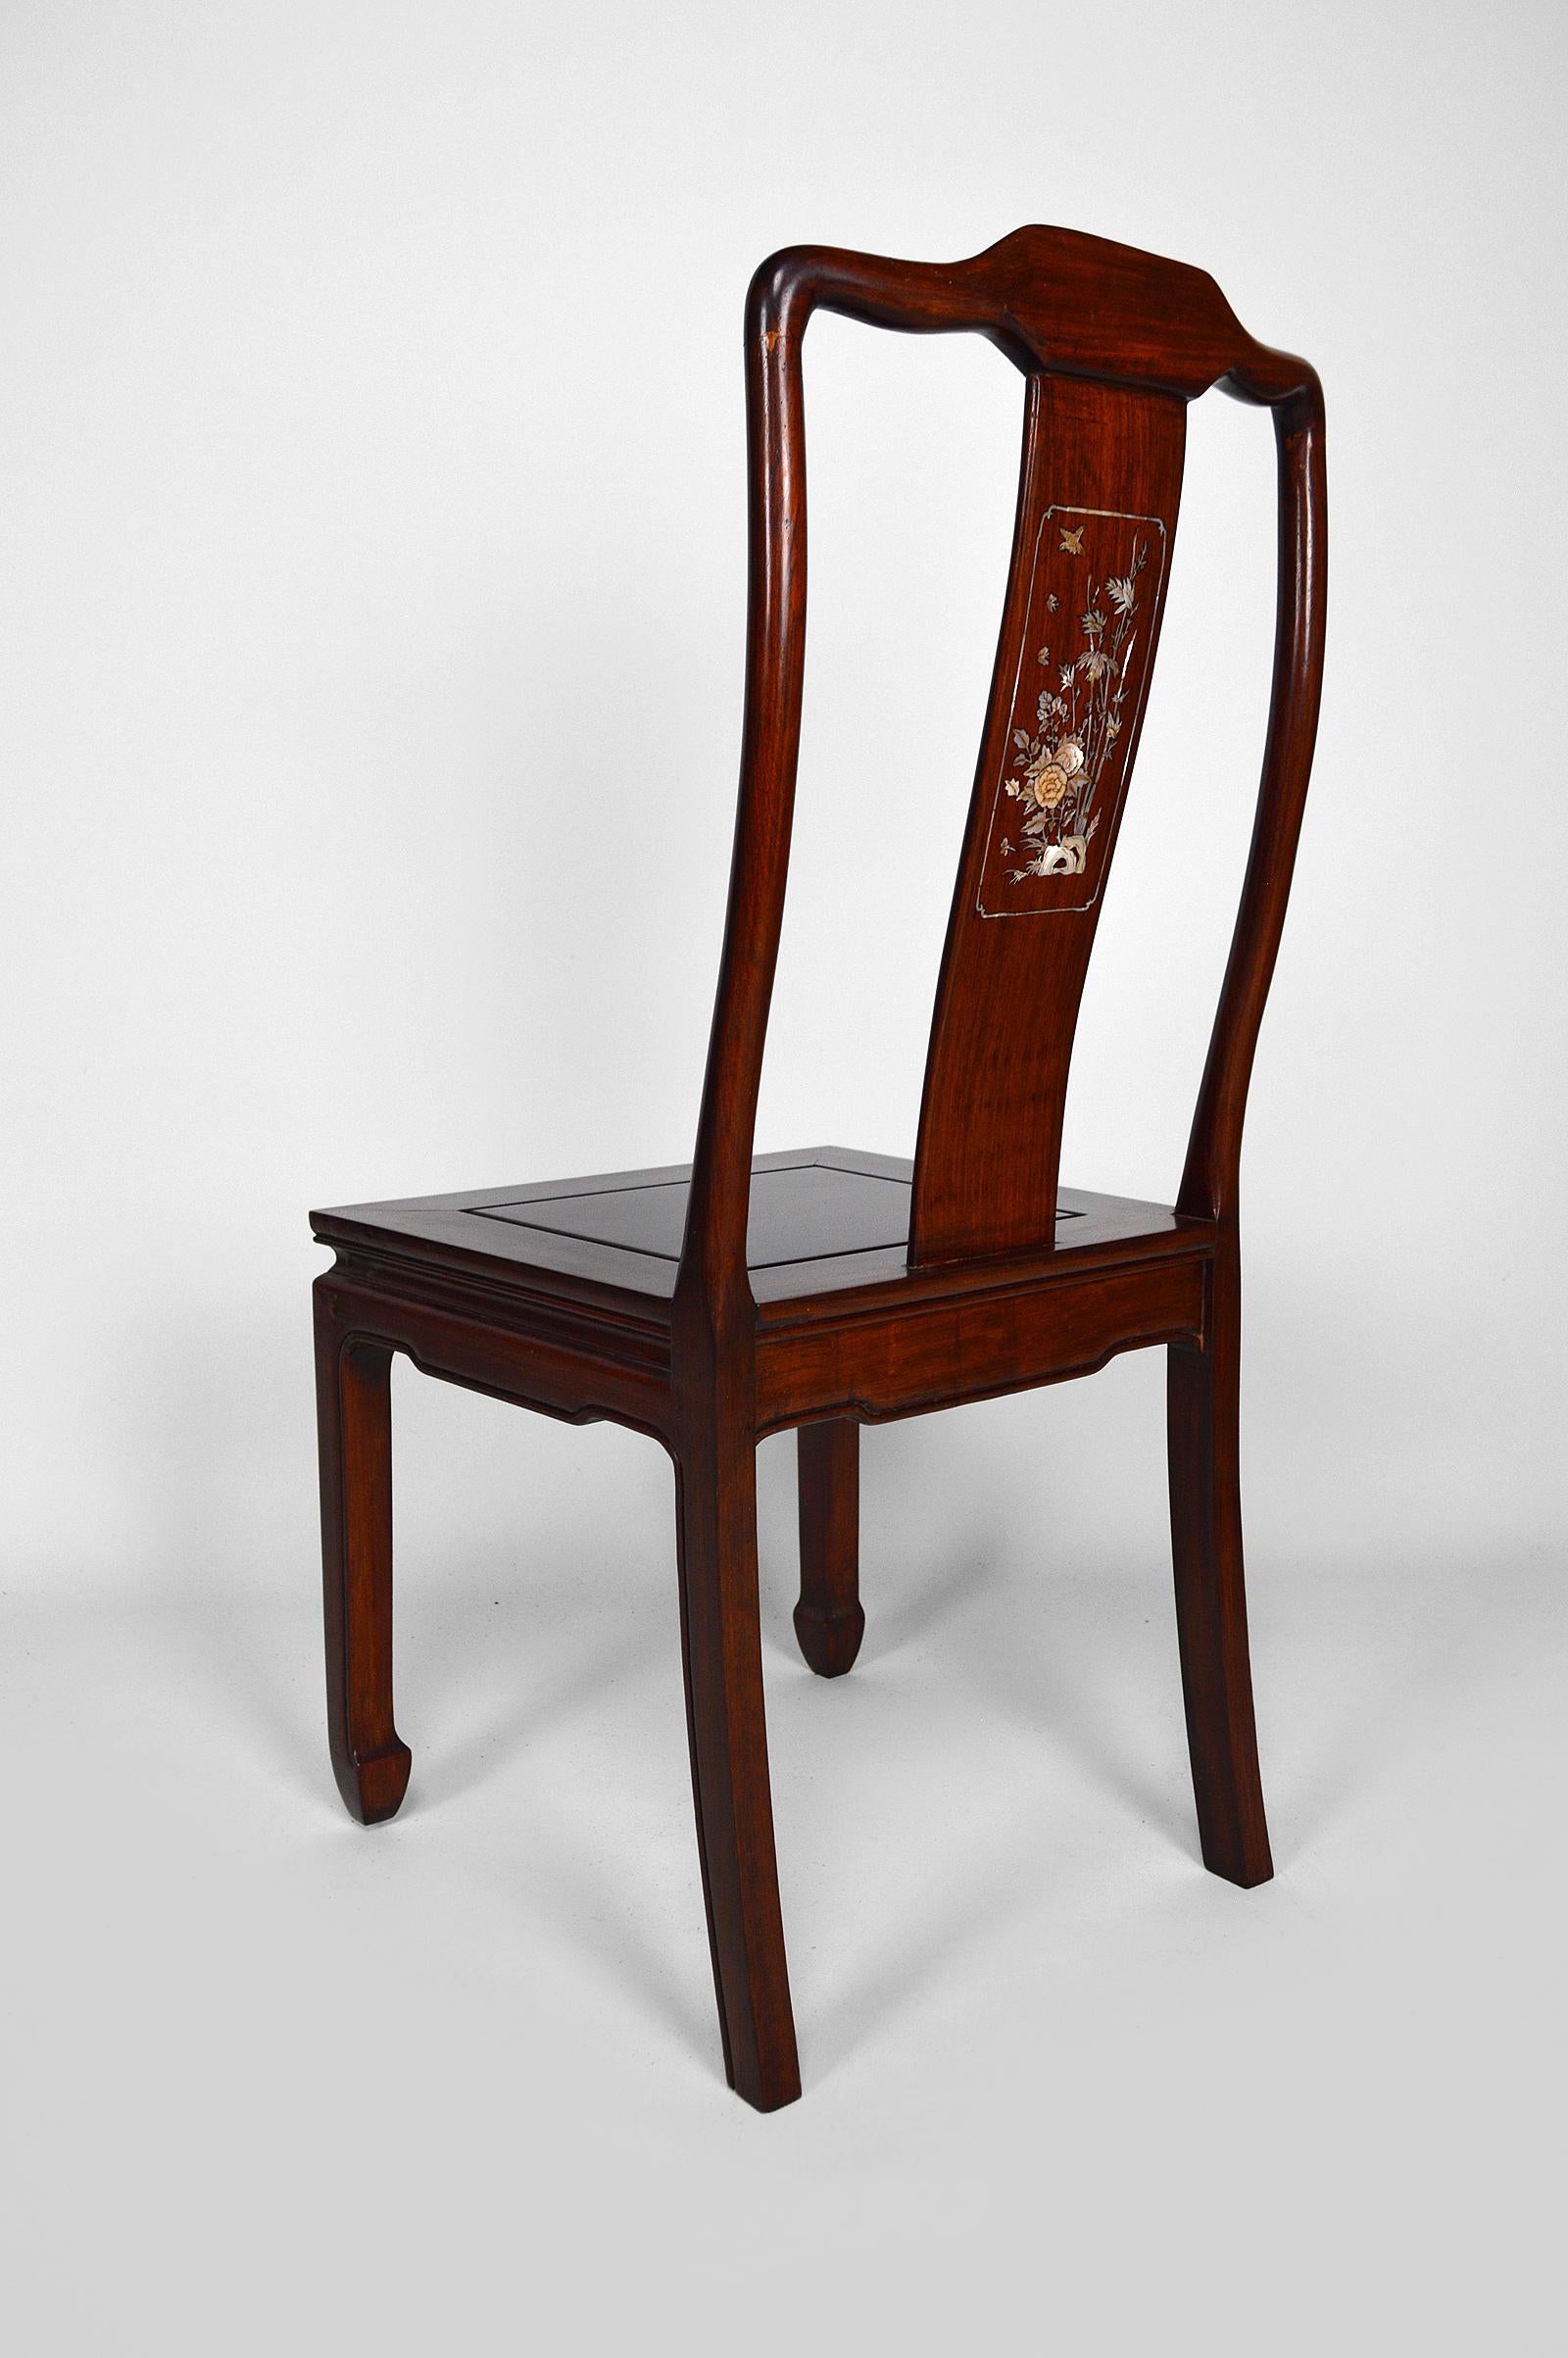 Set of 5 Asian Inlaid Wooden Chairs, Mid-20th Century 1